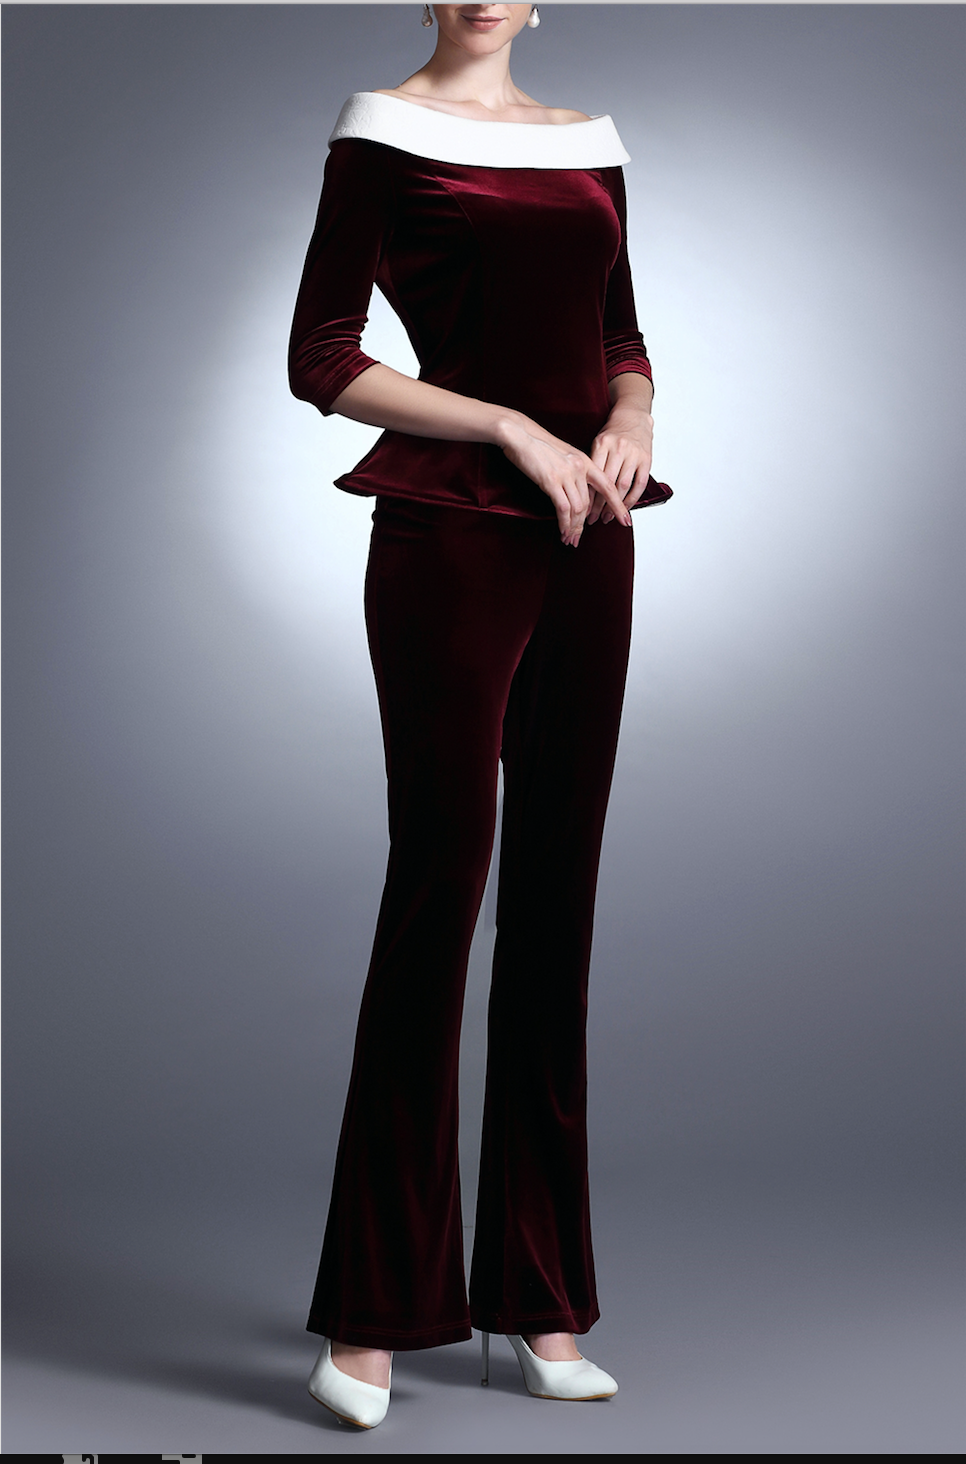 May Stretchy Velvet Pants - Luxurious, Fun & Multifunctional